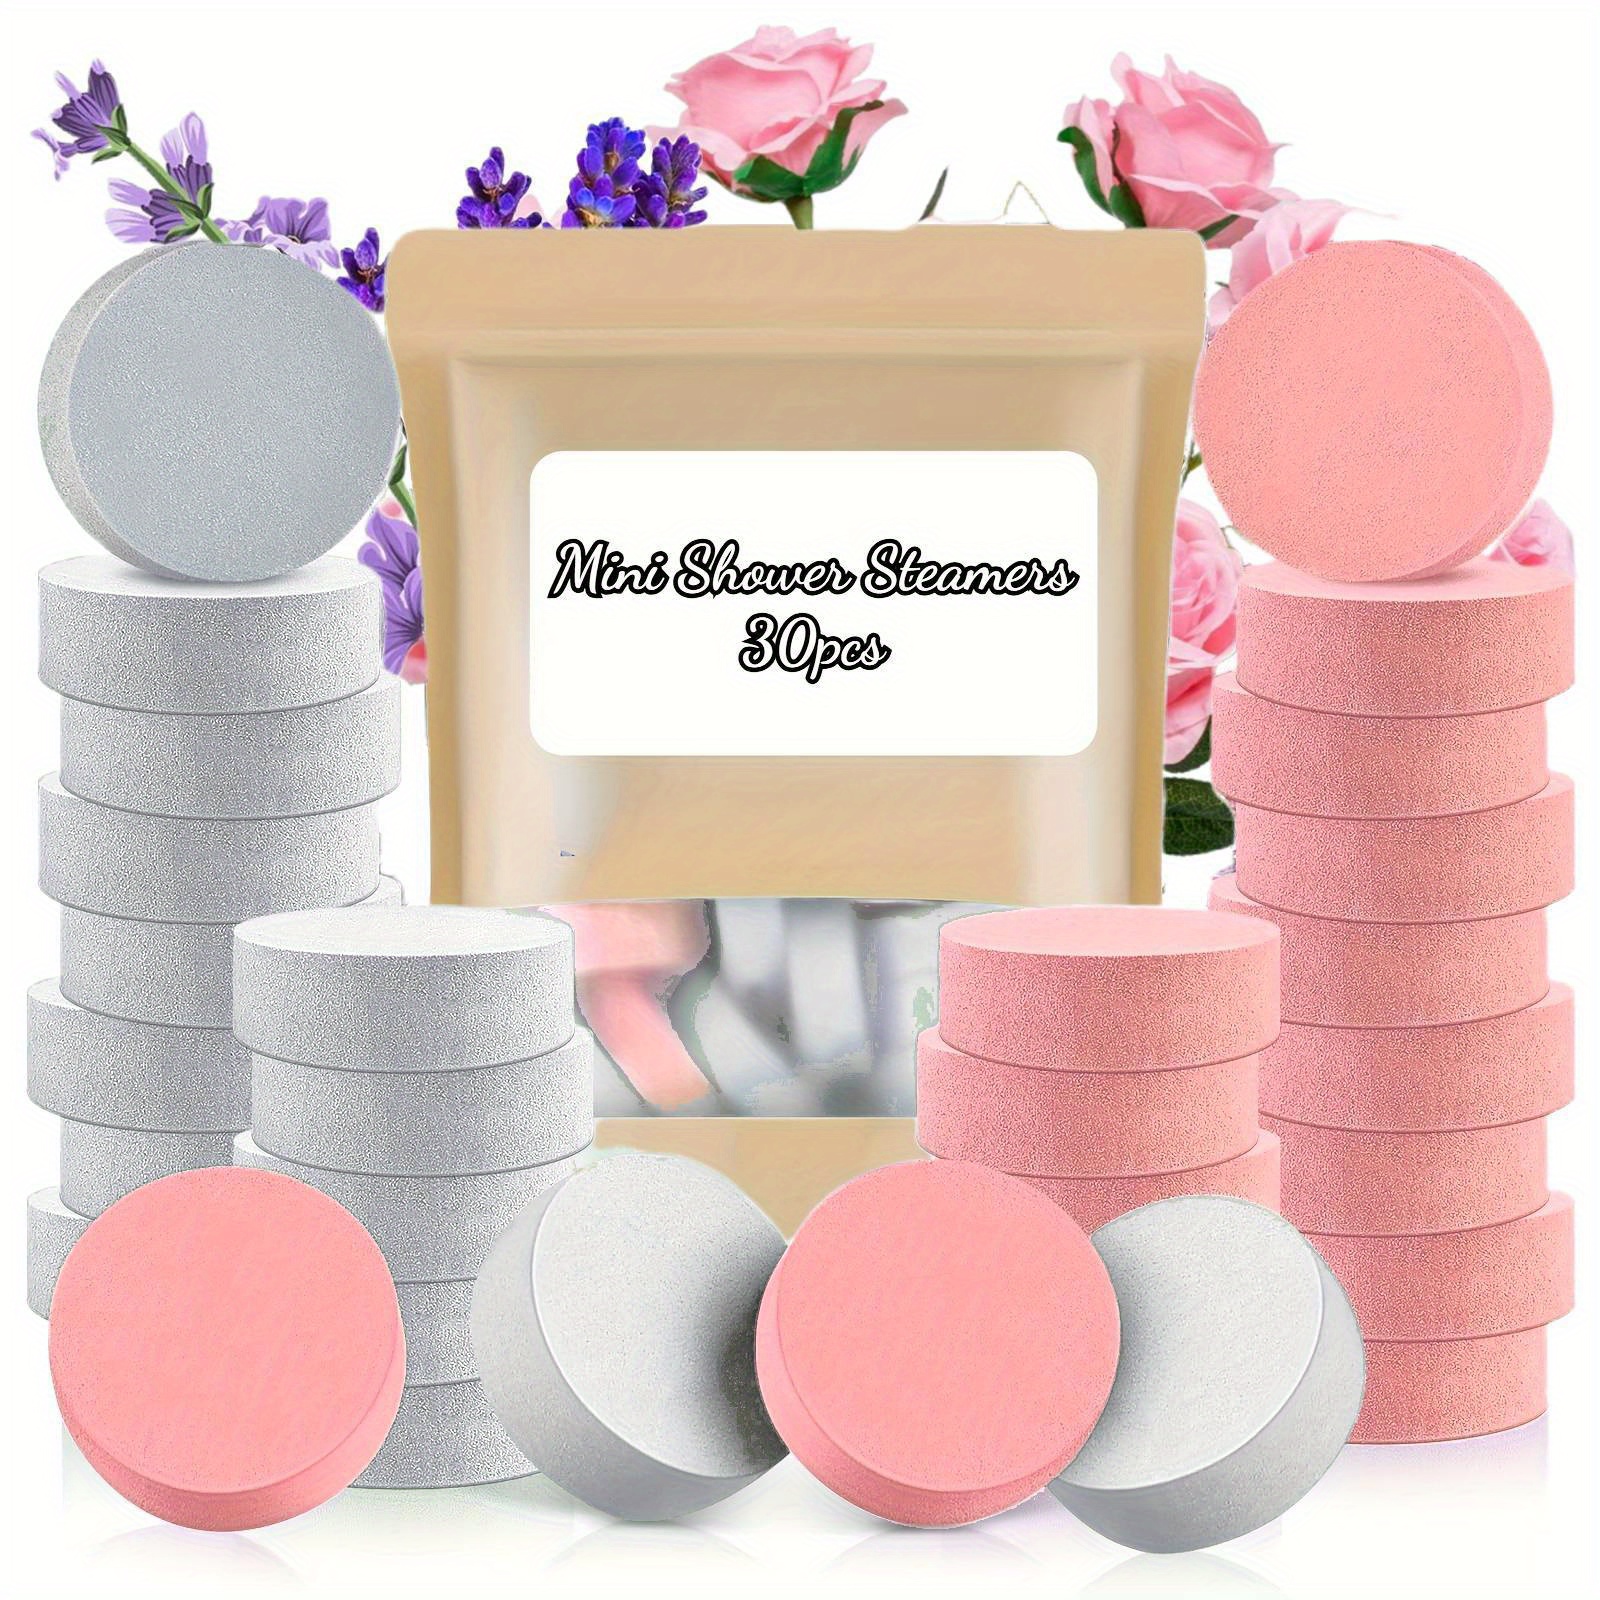 

30pcs Mini Shower Steamers Christmas Gifts Essential Oil Shower Bombs For Relaxation And Daily Self Care Lavender And Rose For Men And Women